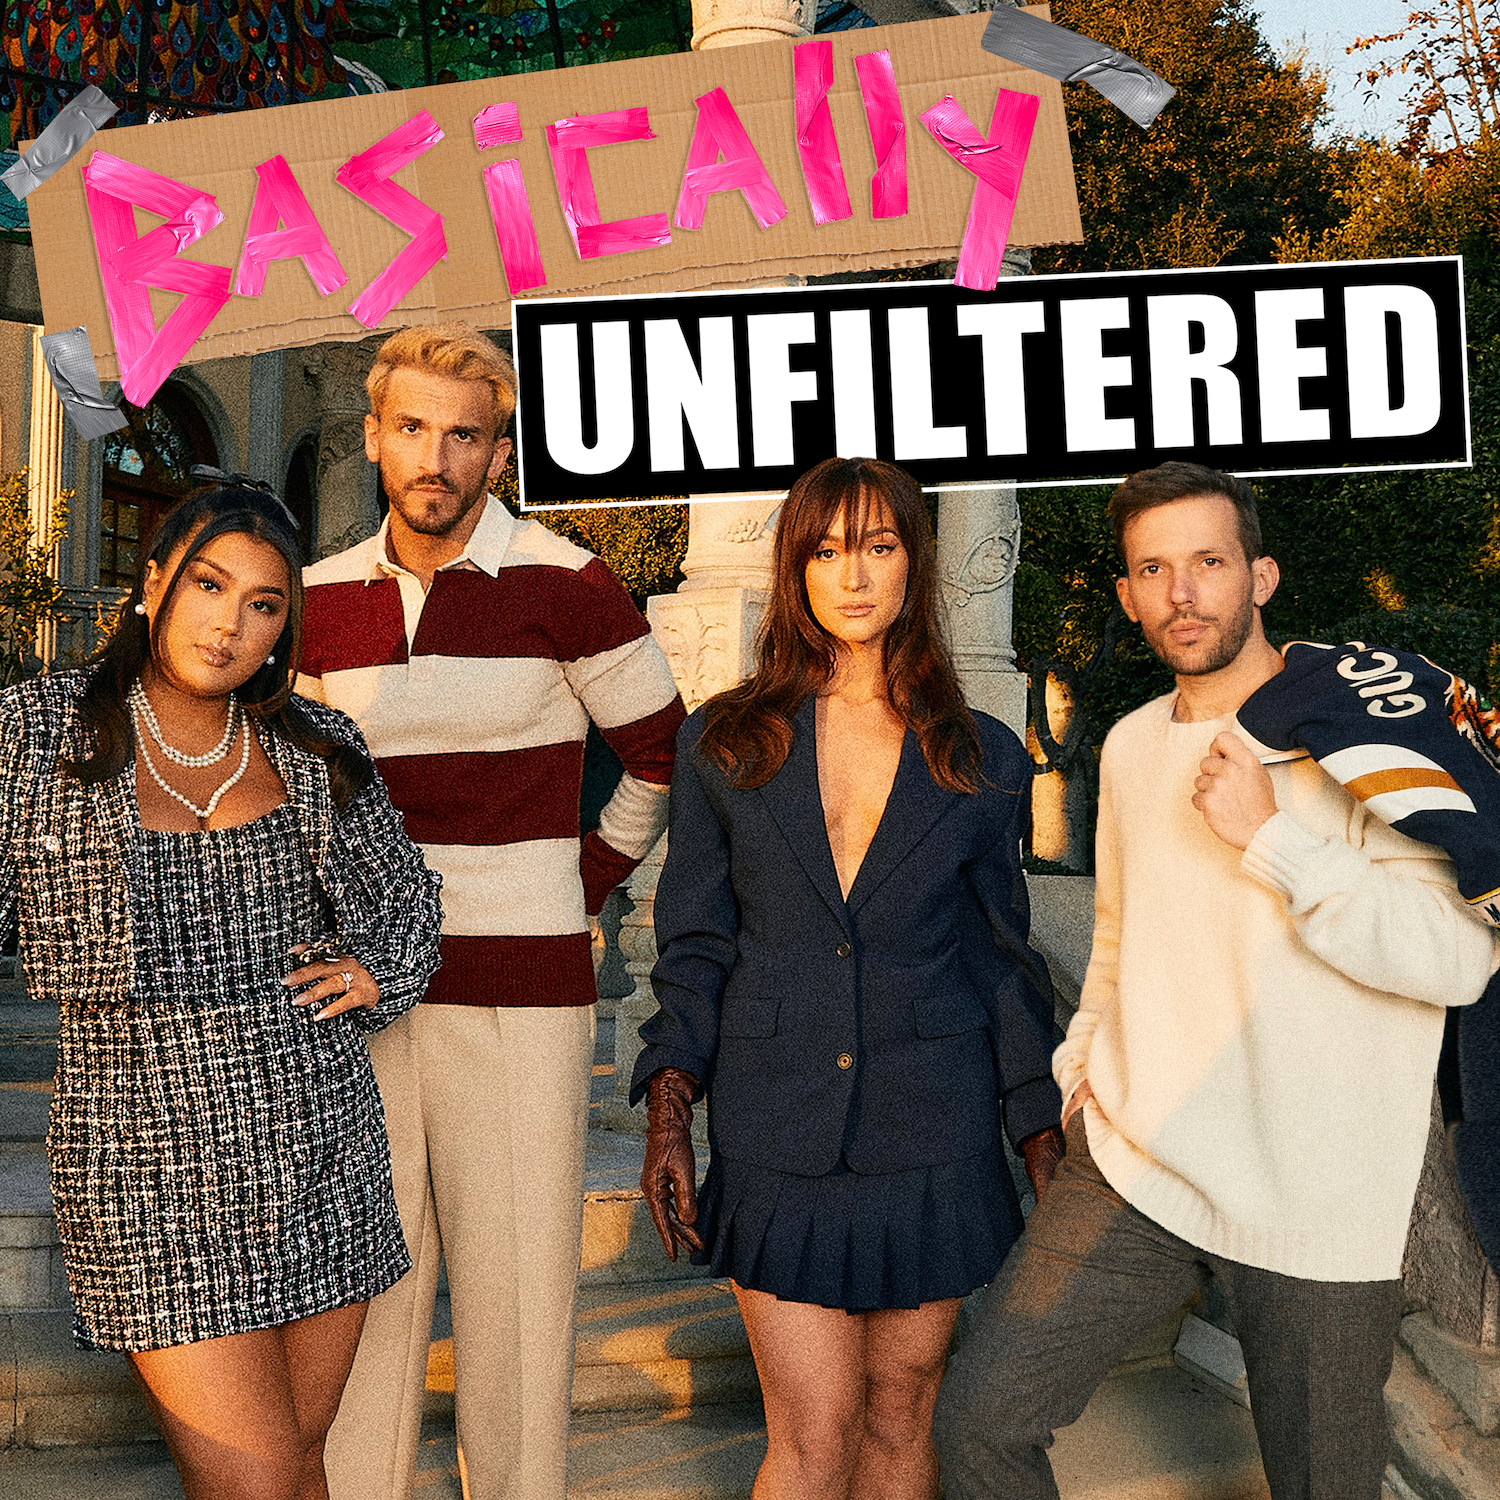 5: We Have to End Our Show Already... by Basically Unfiltered with Remi, Alisha, Zane and Heath